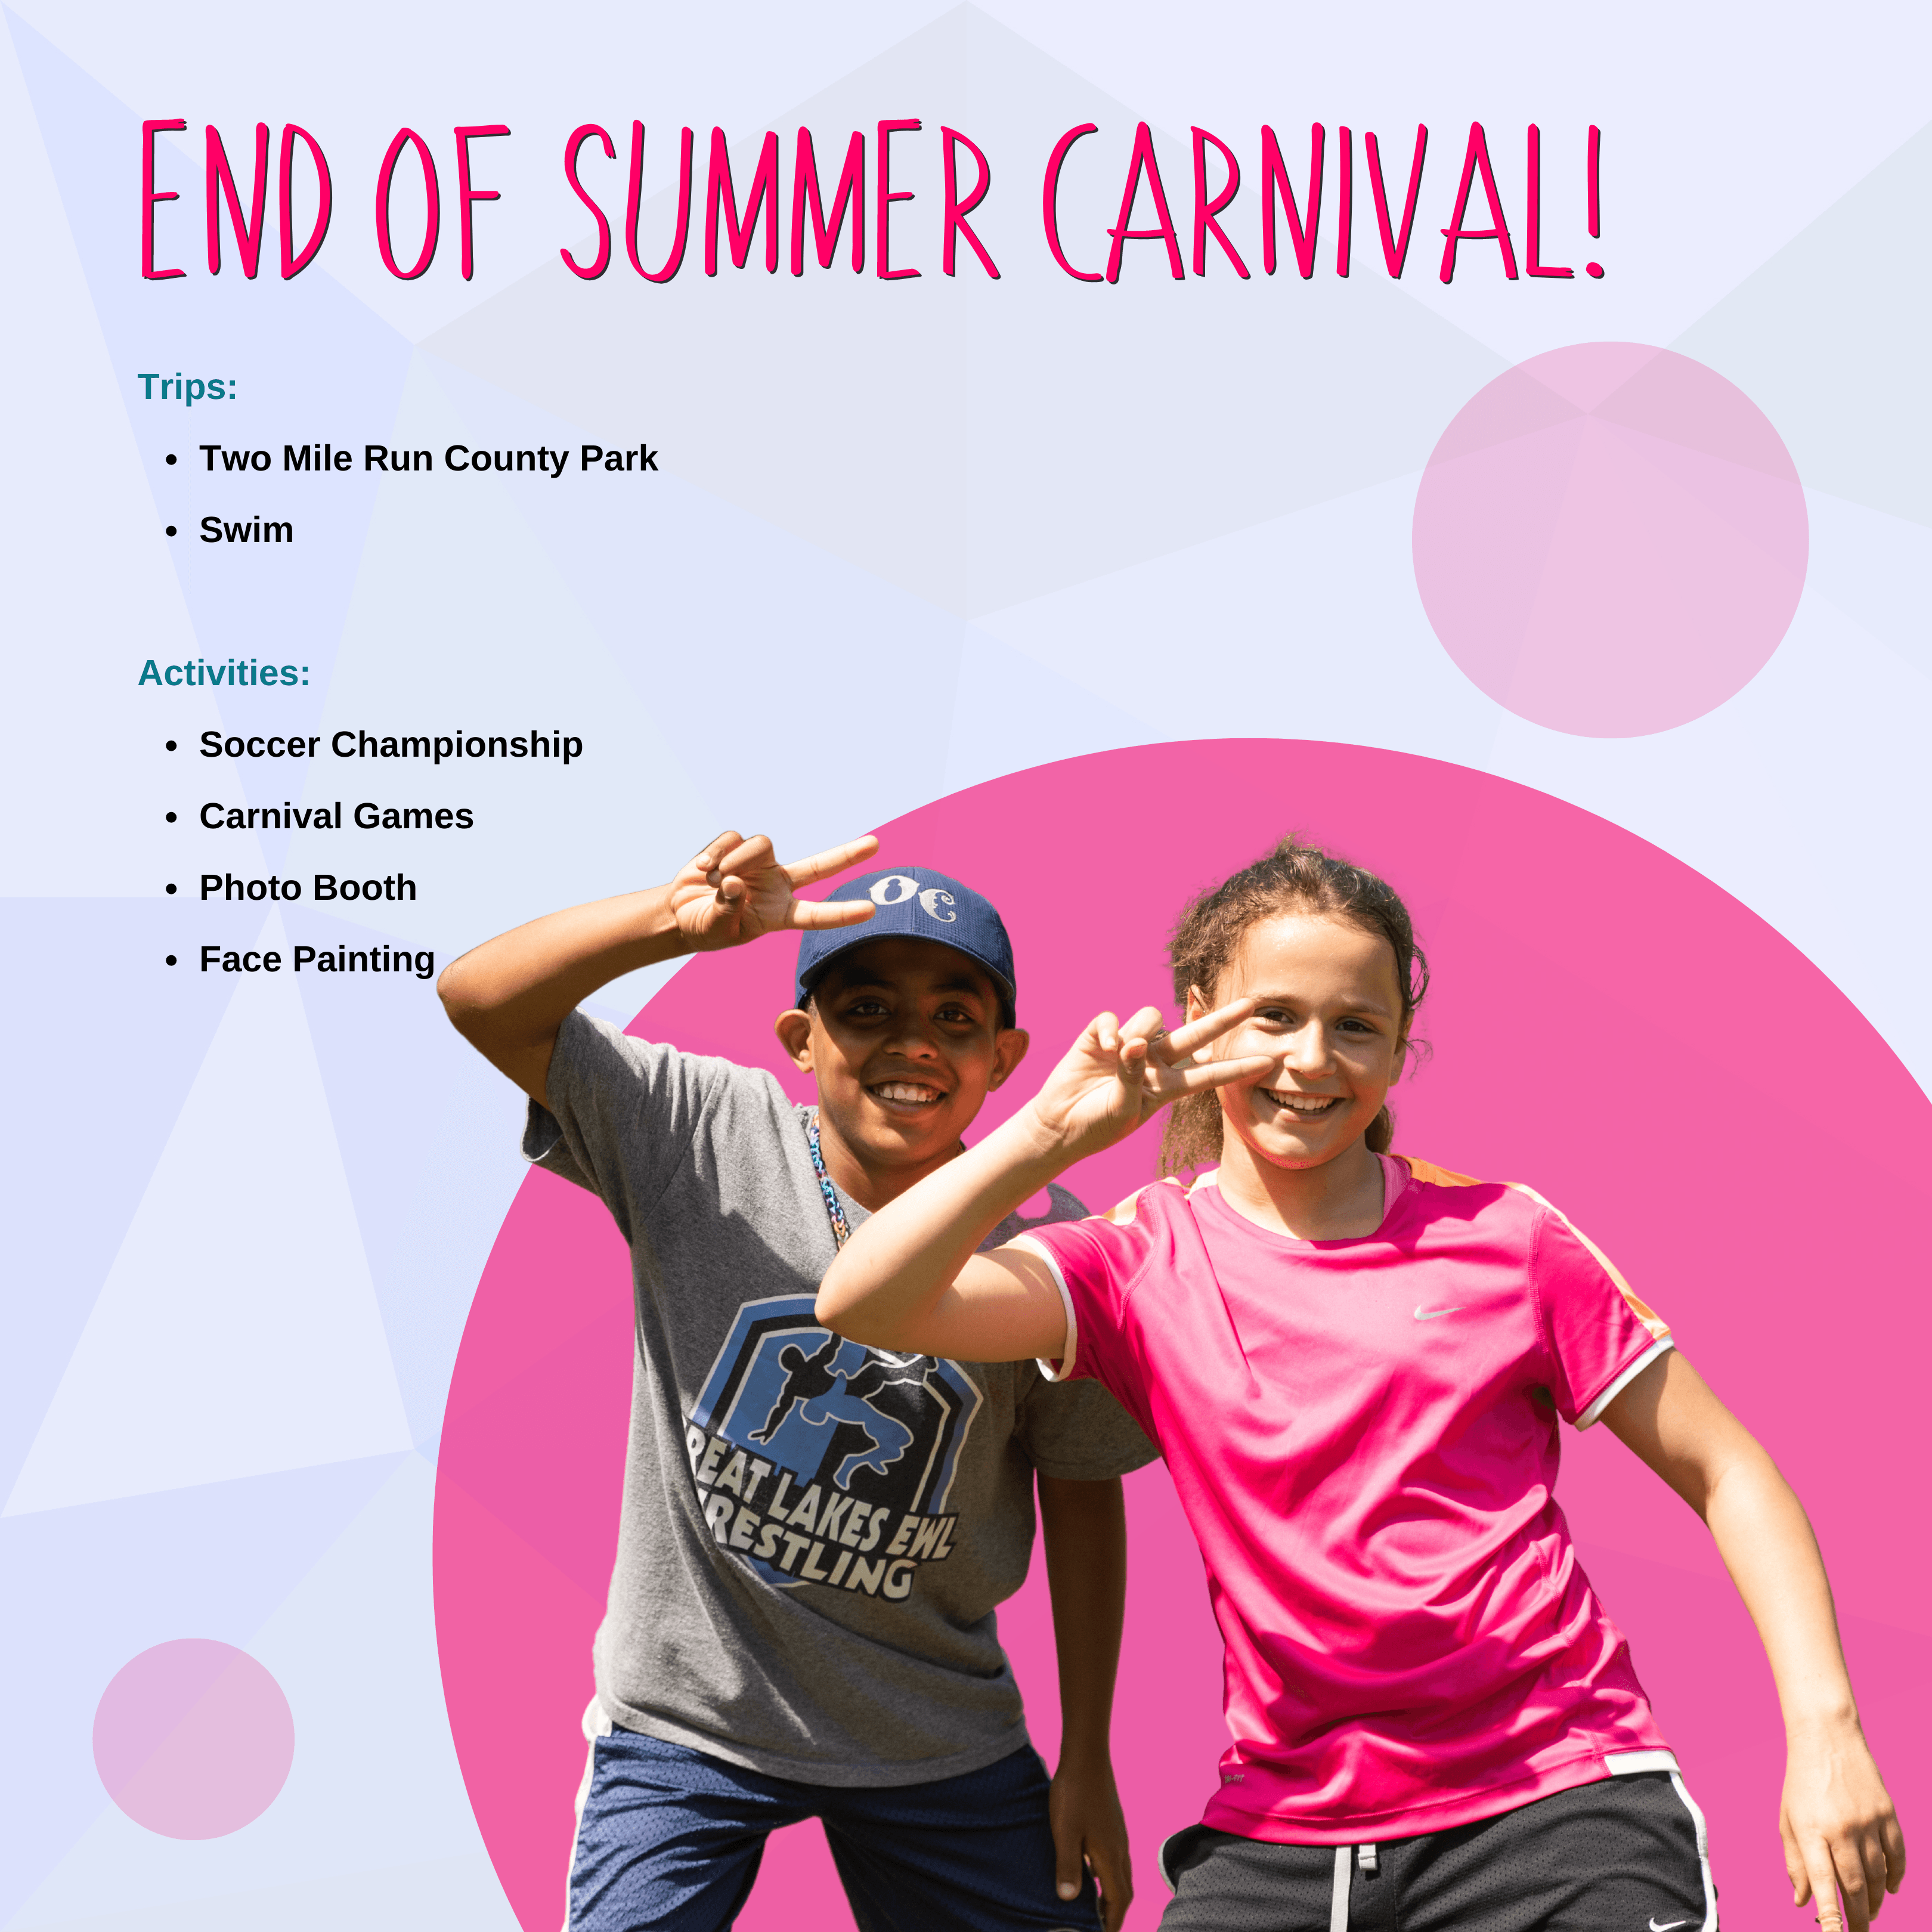 End of Summer Carnival!